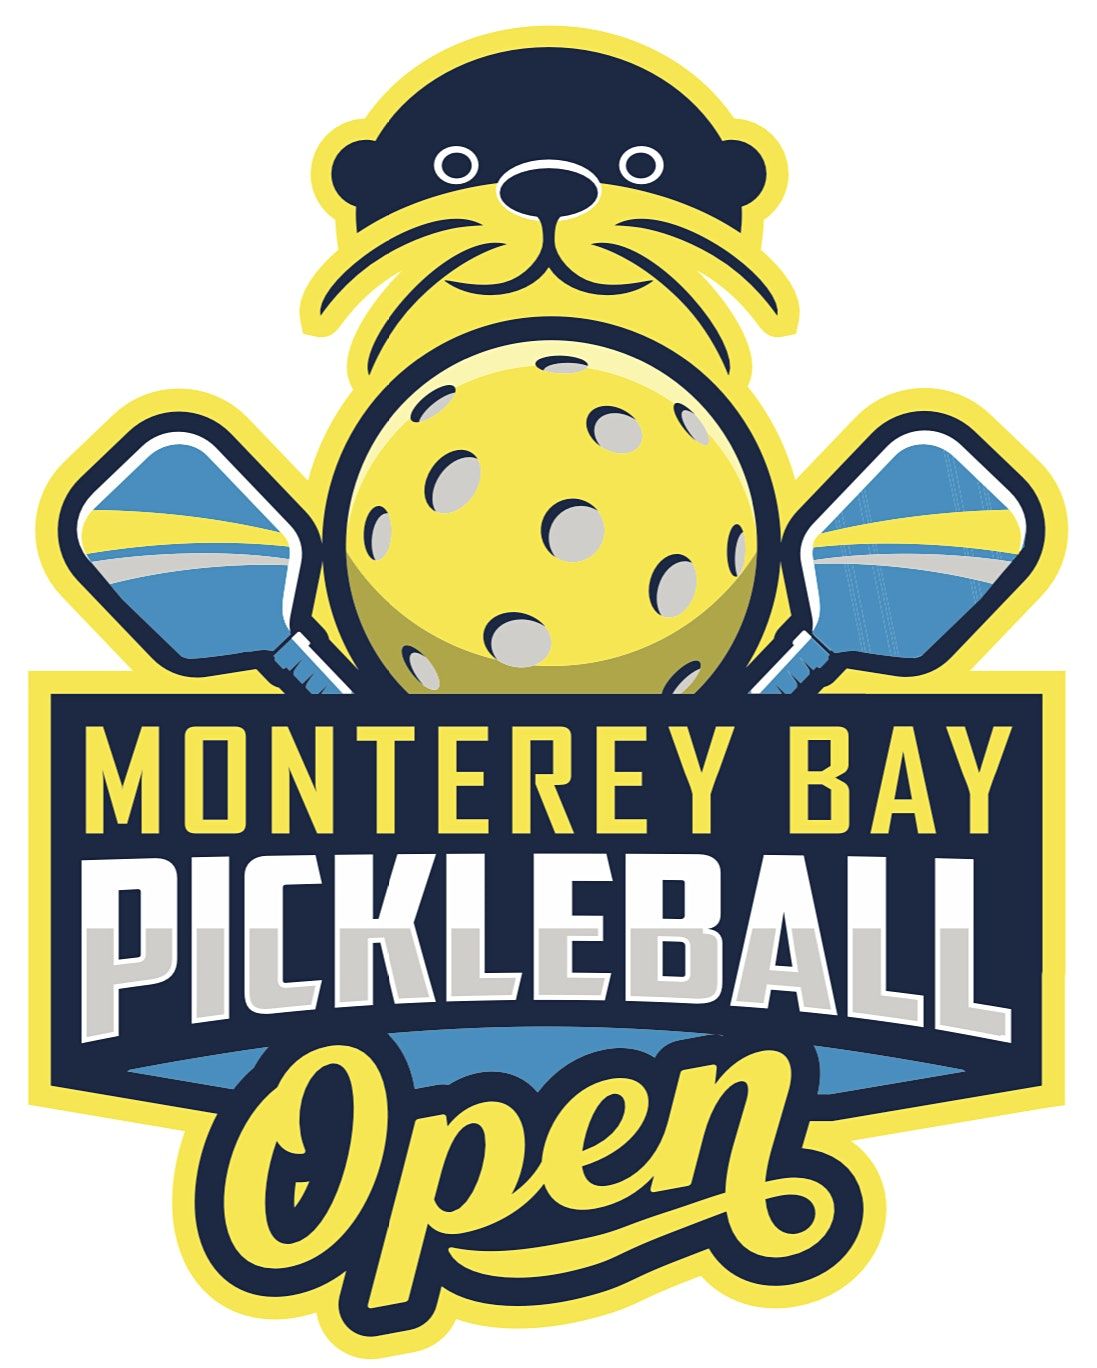 Monterey Bay Pickleball Open Spectator Tickets, 15 Old Golf Course Rd